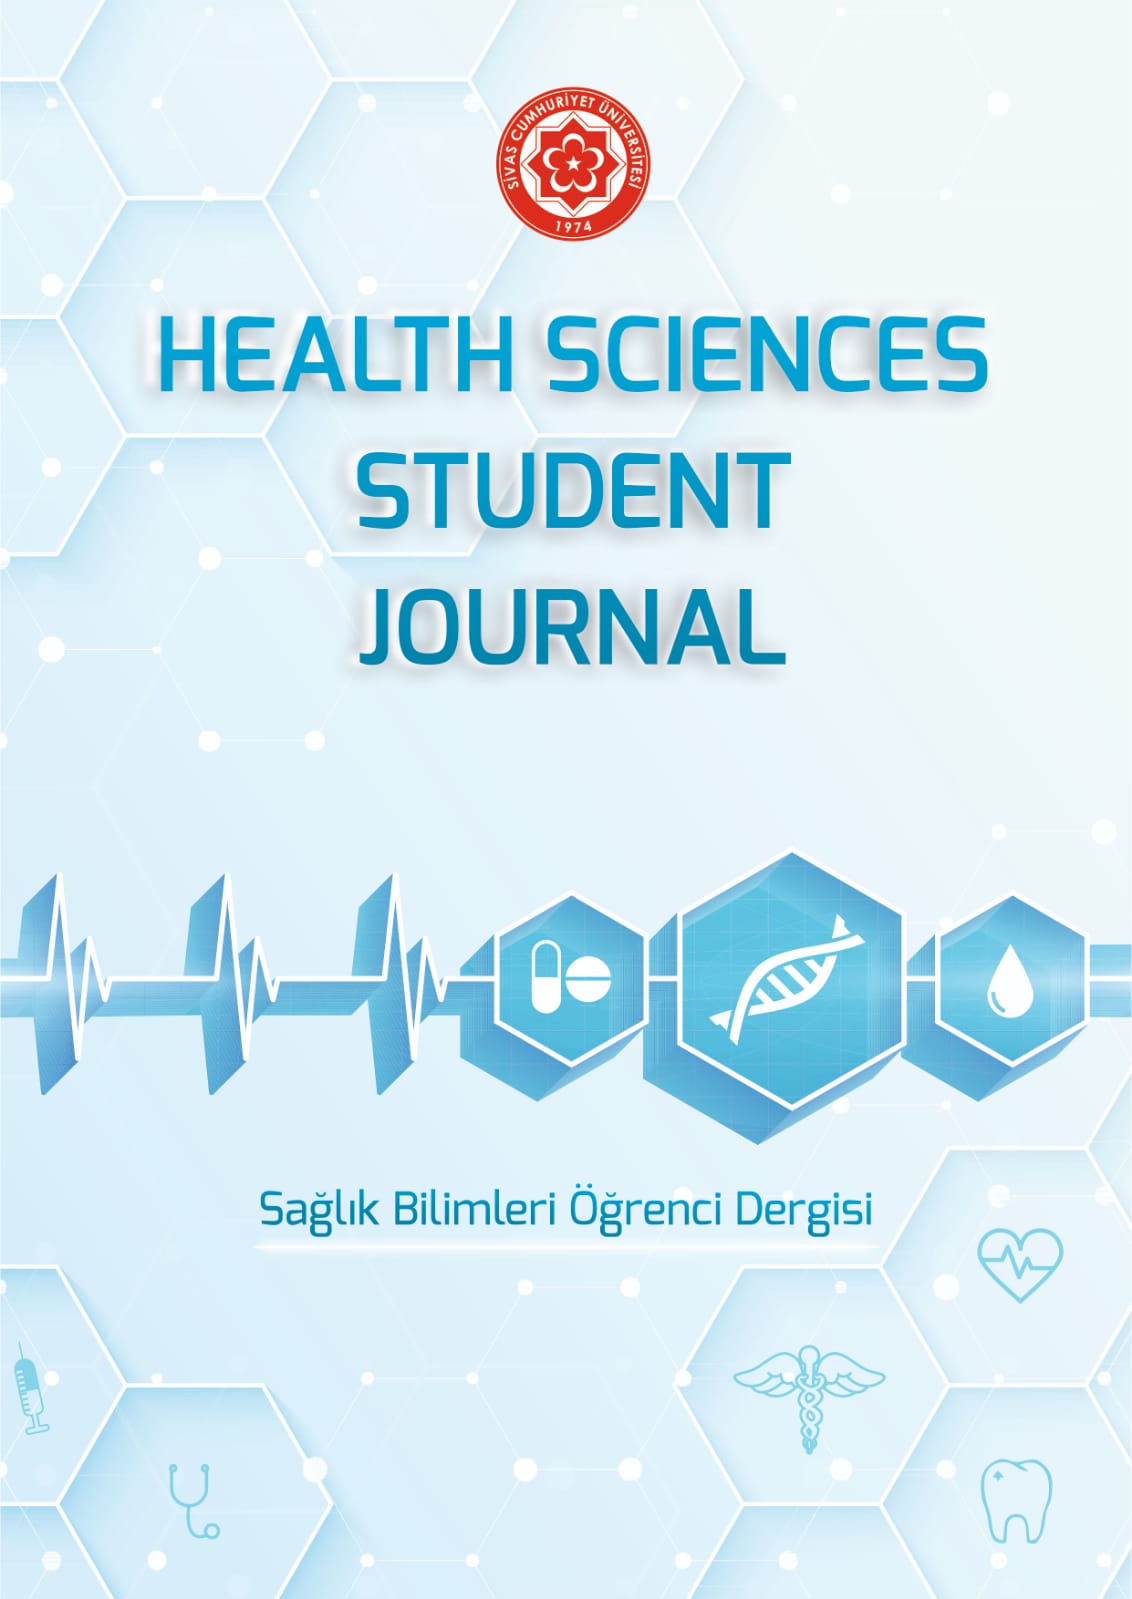 Health Sciences Student Journal